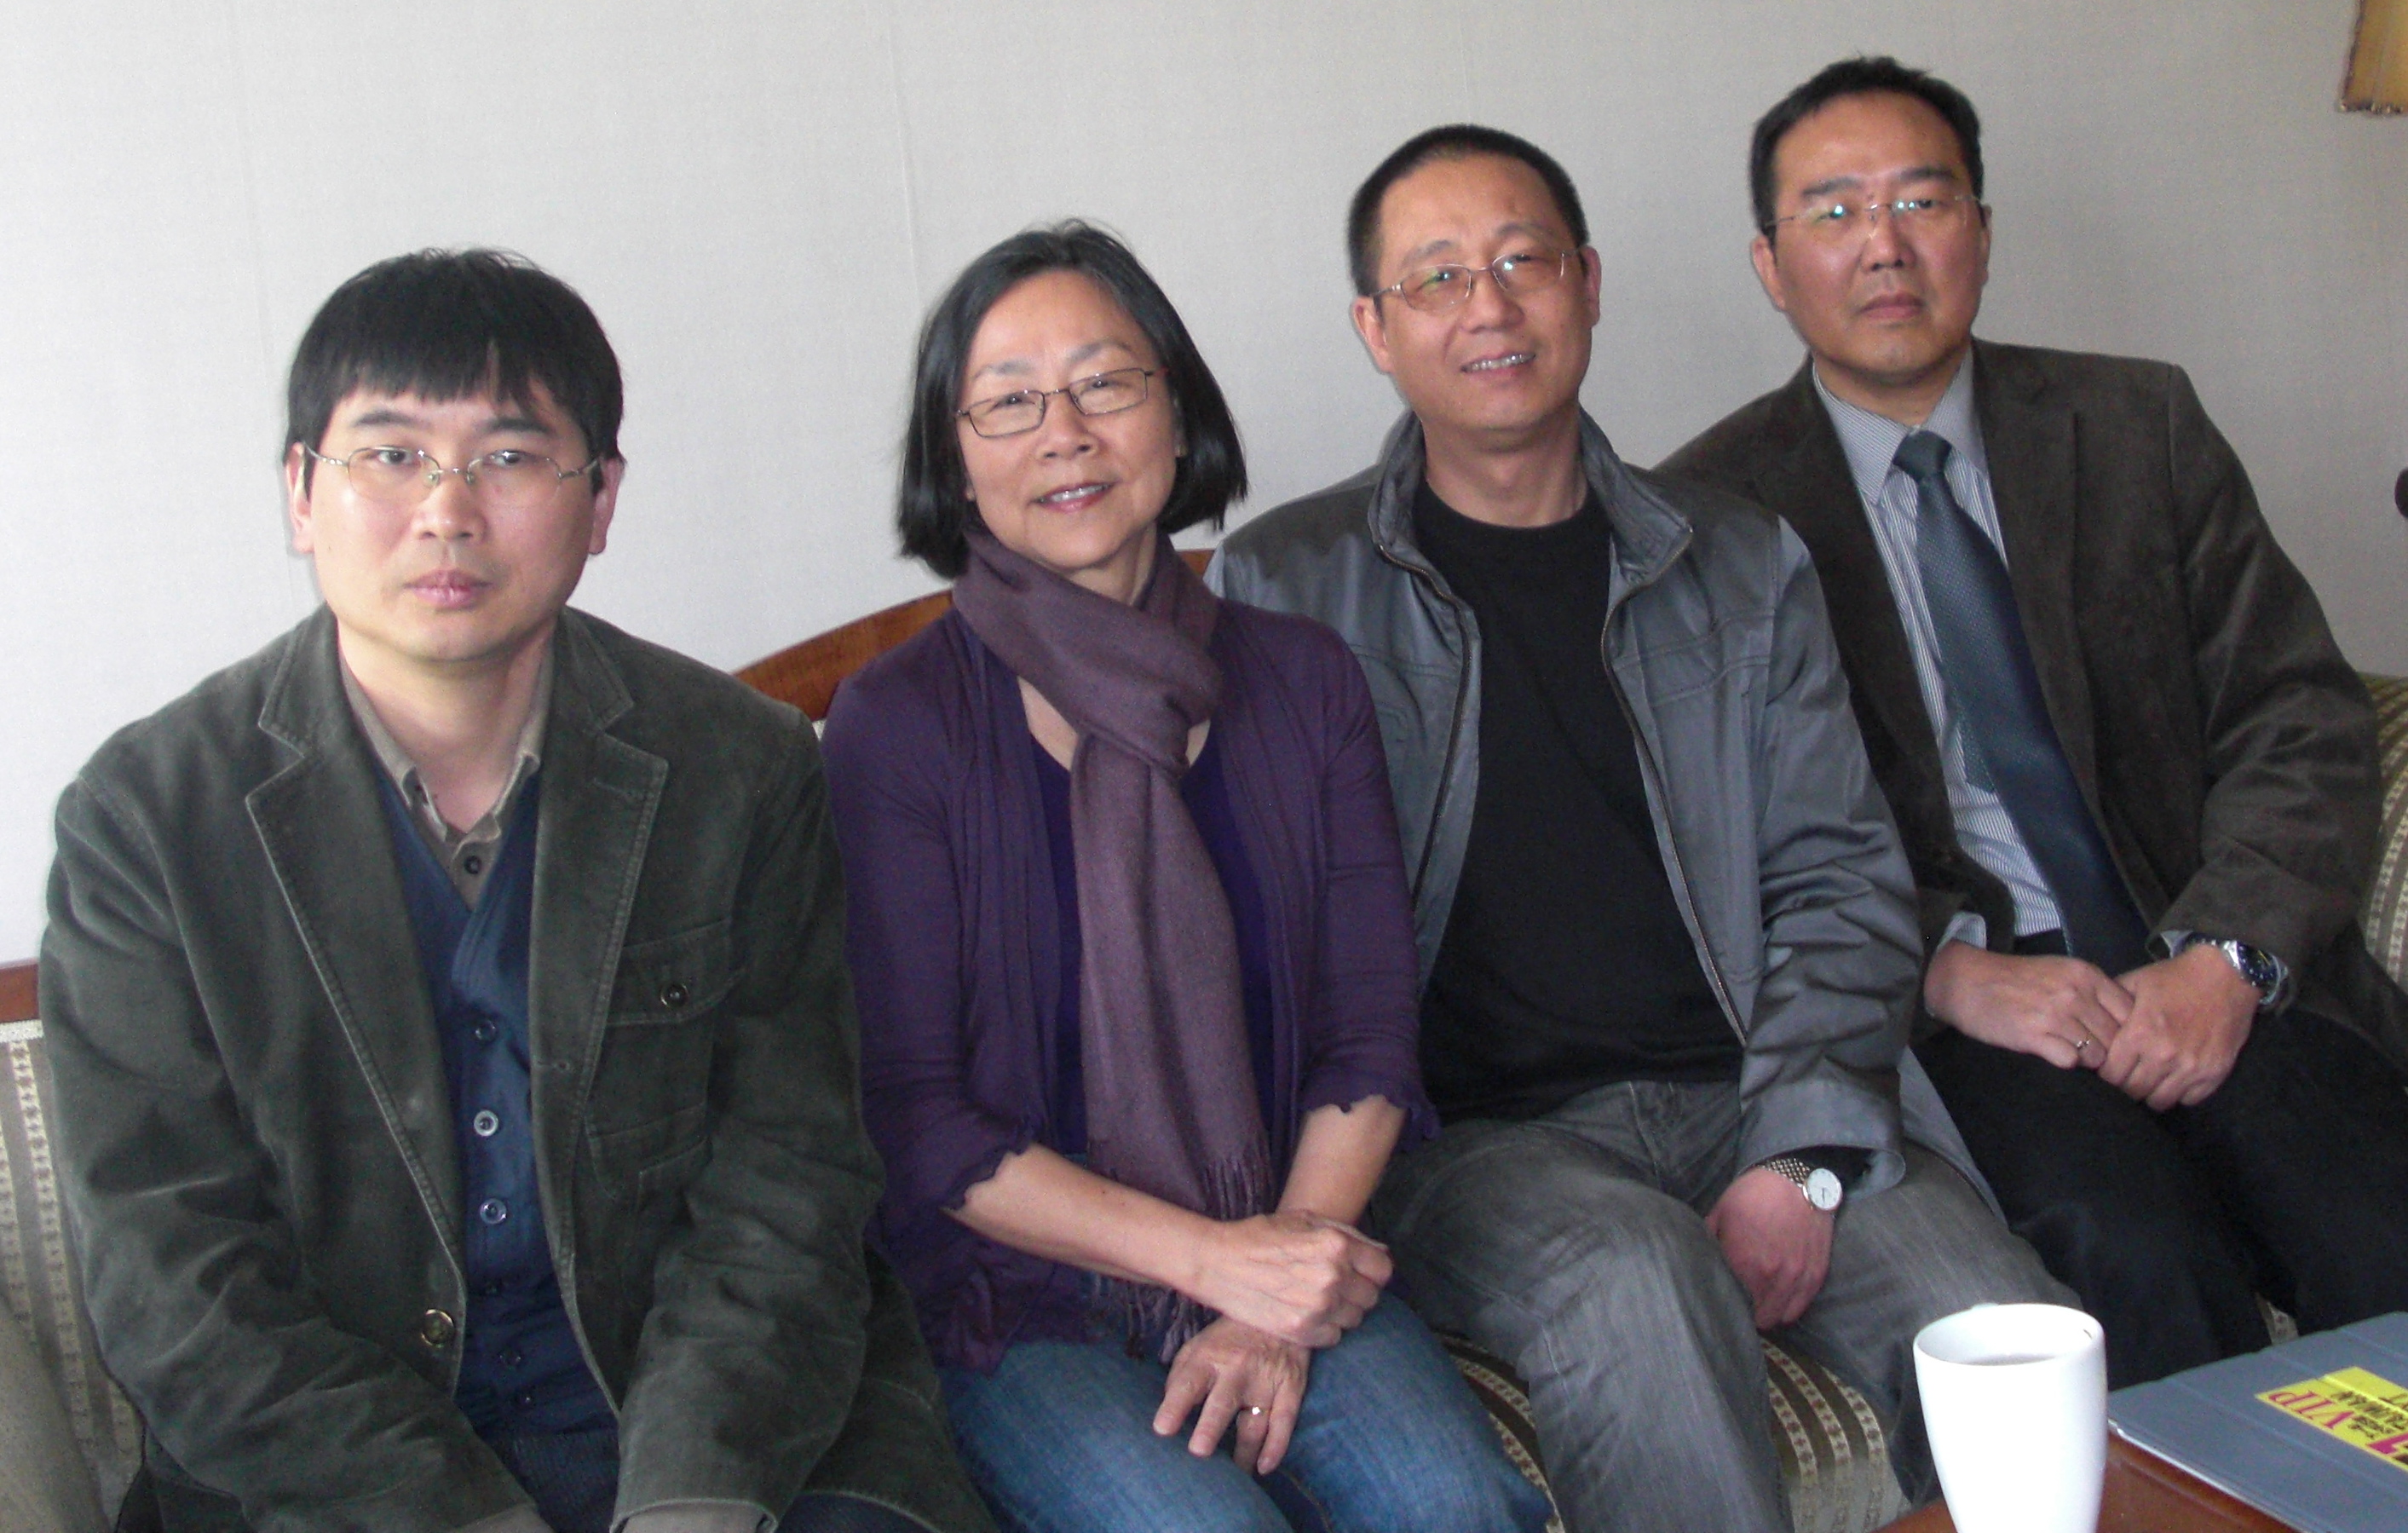 From left to right: Chang Ping, Tienchi Martin-Liao, writer Ye Fu, and a friend, in Amsterdam in 2012. Image courtesy of the author.  